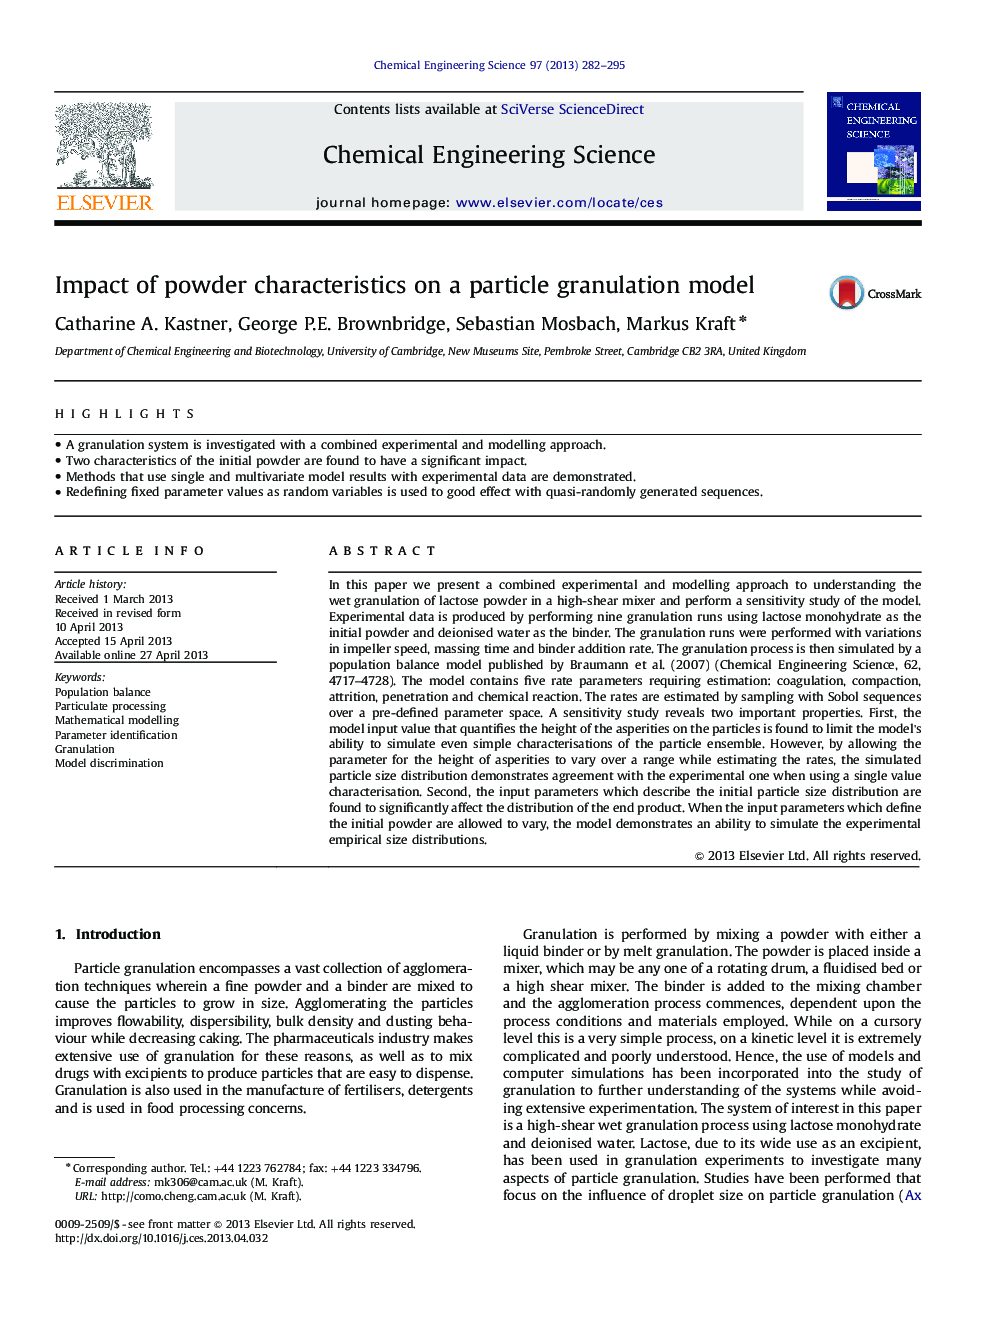 Impact of powder characteristics on a particle granulation model